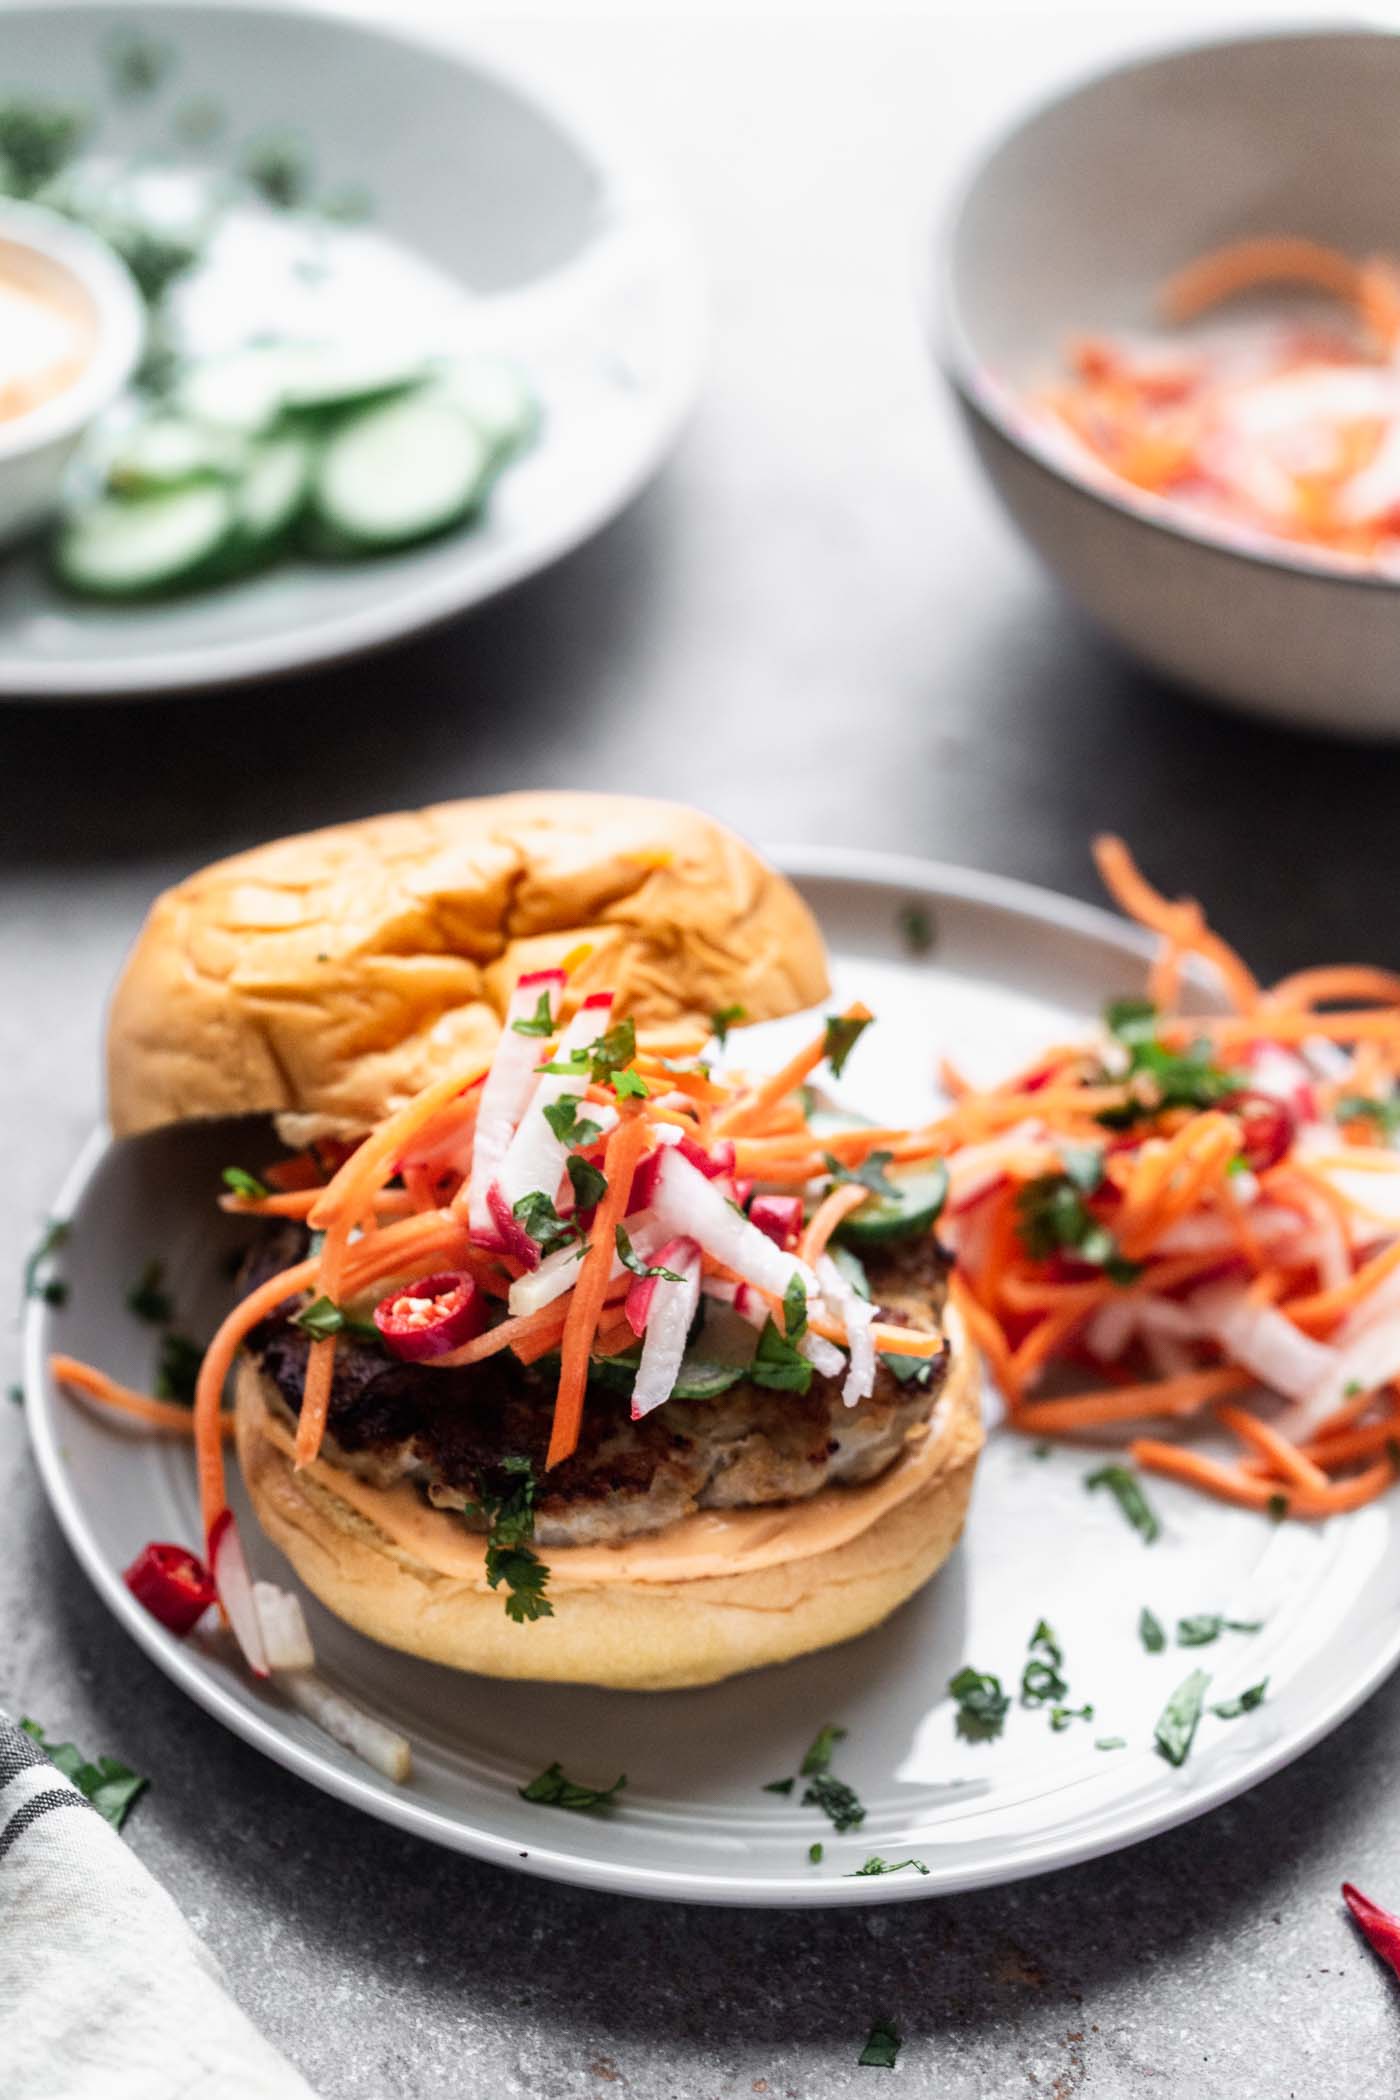 Bánh Mì Chicken Burgers are a burger take on a classic. A ground chicken patty is packed with all the flavors of a classic Bánh Mì sandwich, topped with sweet and spicy pickled veggies, a zippy sriracha mayo, and sandwiched between a toasted brioche bun. 